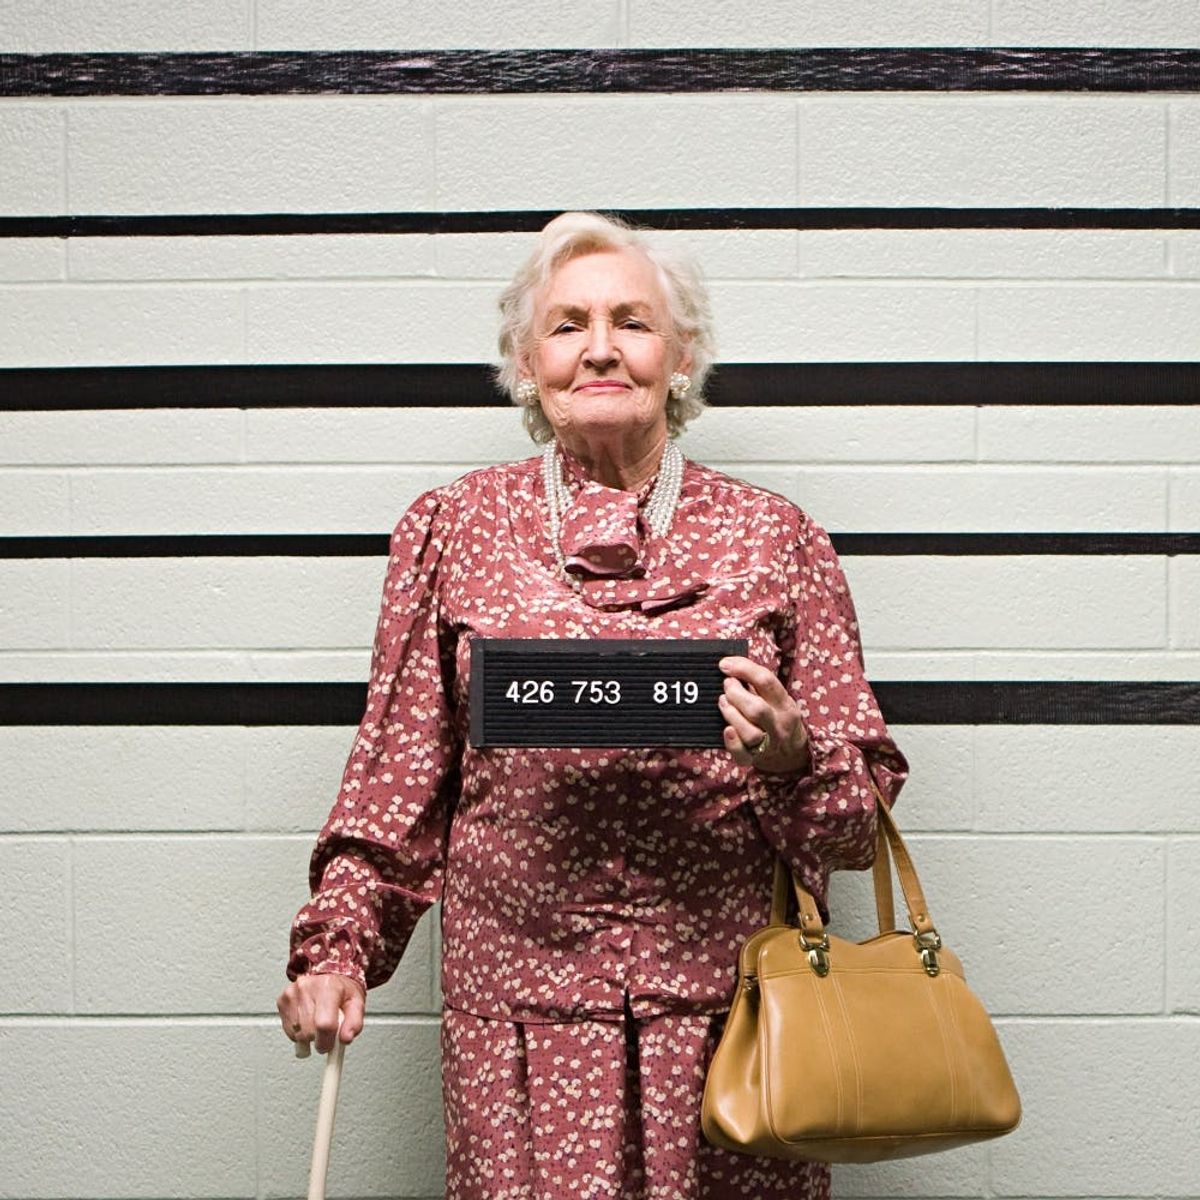 You Won’t Believe the Reason This 99-Year-Old Woman Was Arrested